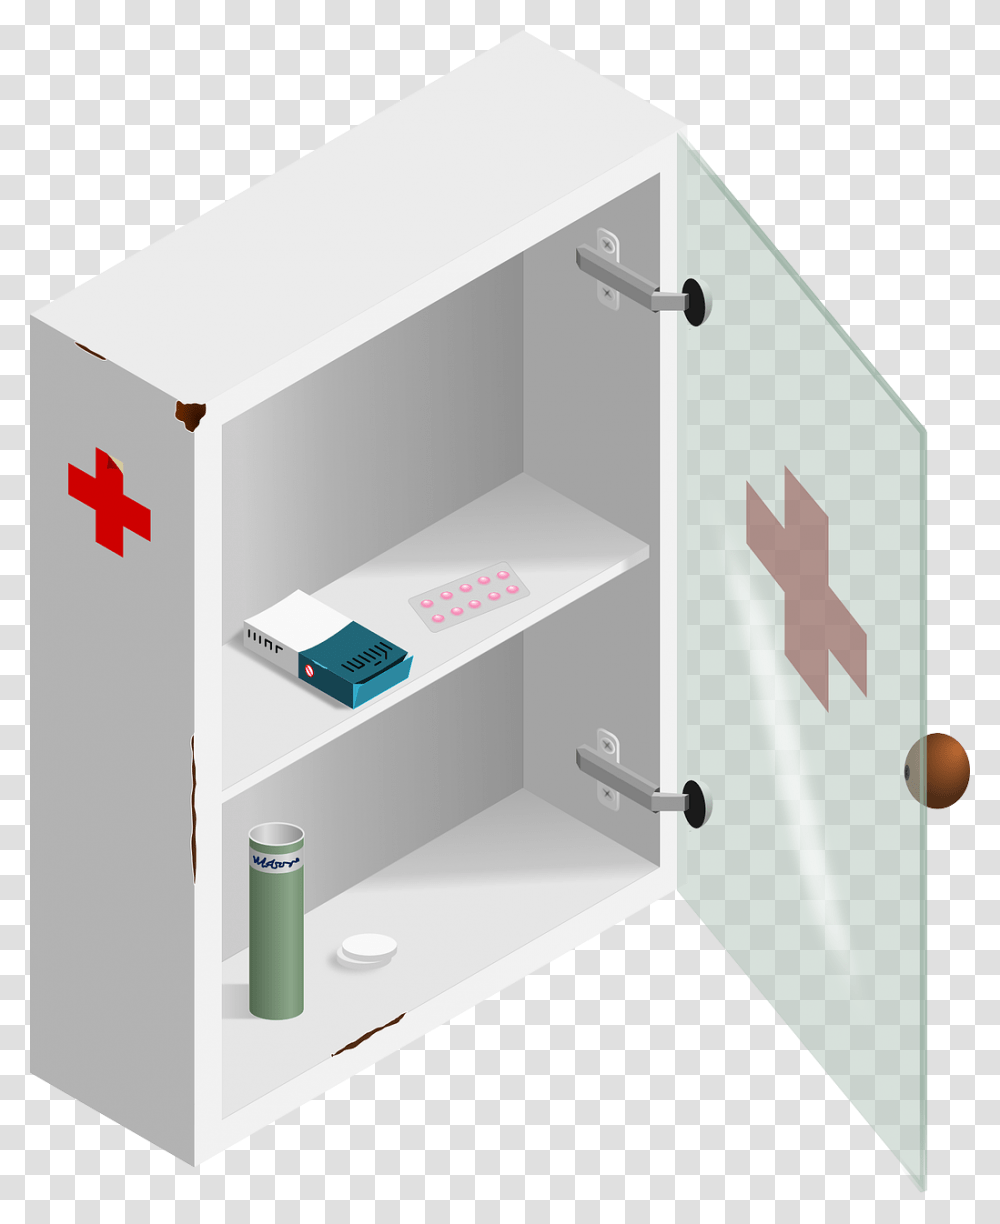 Box First Aid Glass Door Medicine Medikit First Aid Box Size, Furniture, Cabinet, Medicine Chest Transparent Png